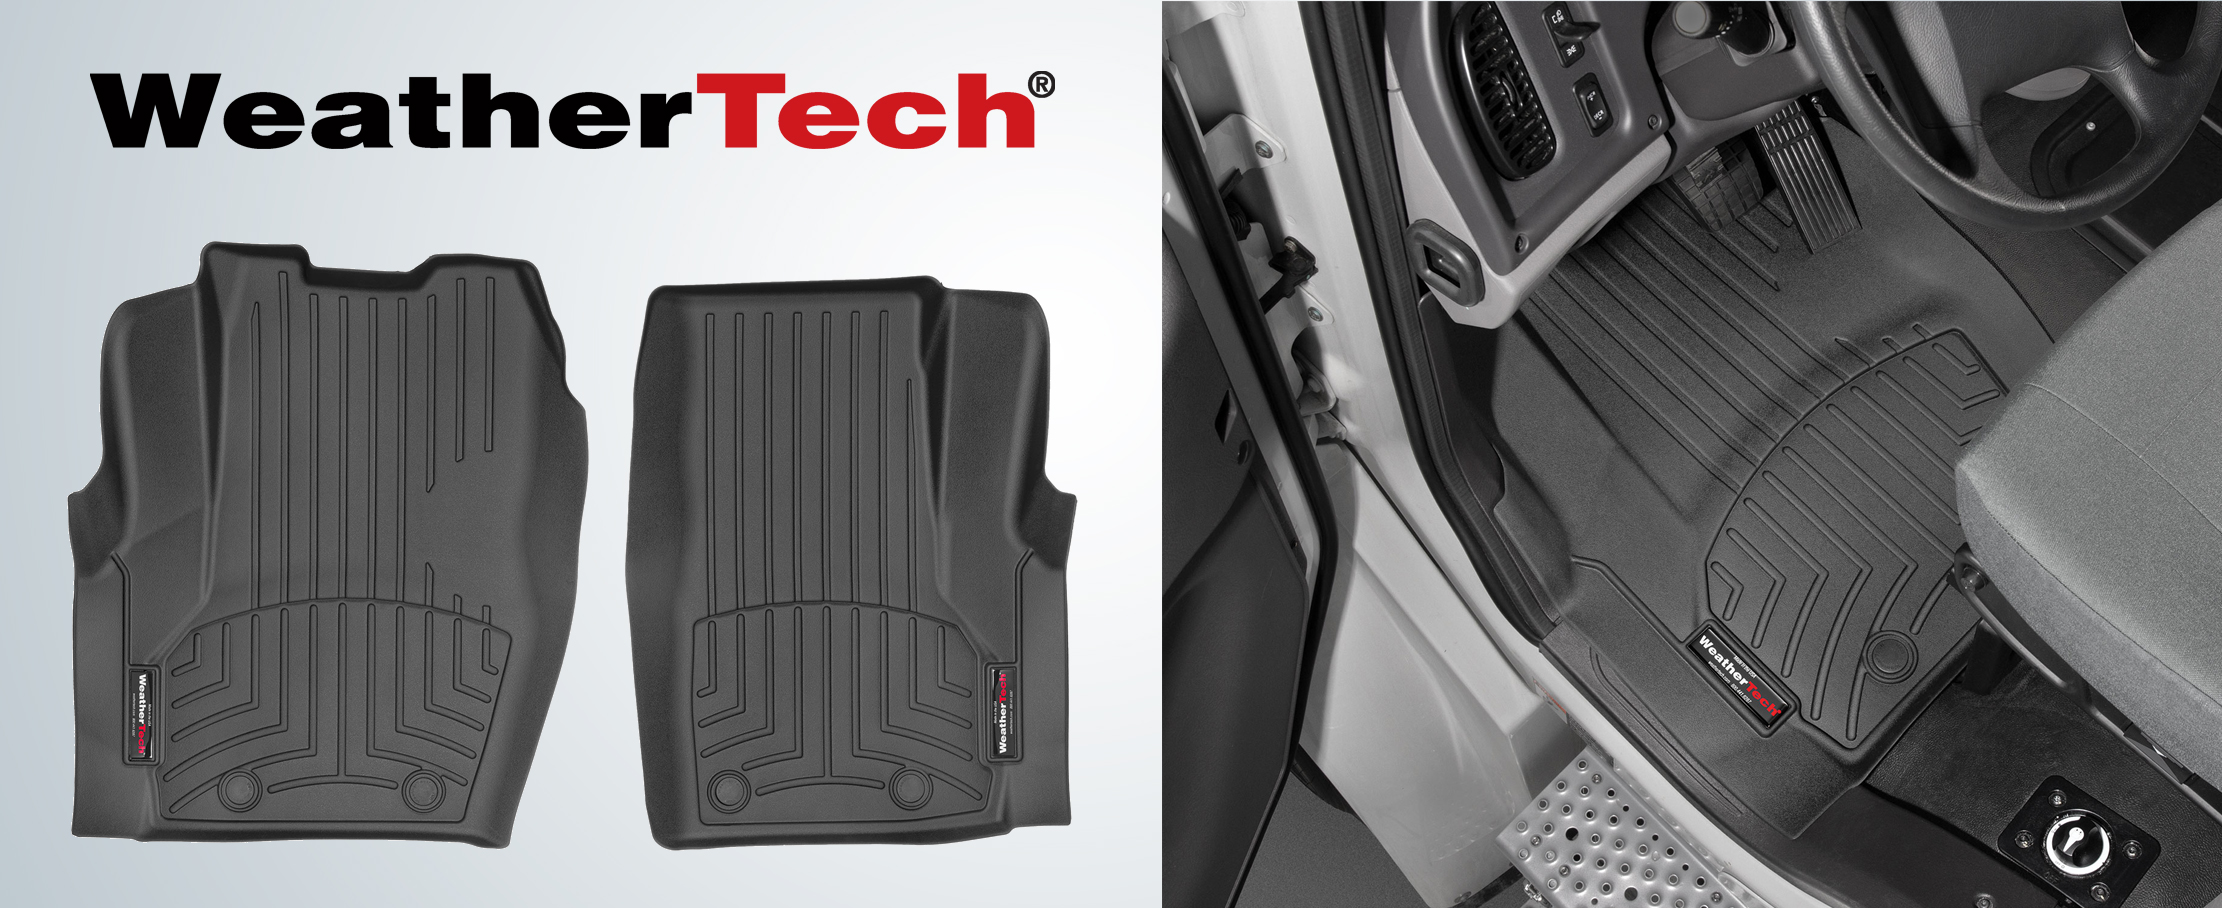 Automann Partners with Industry Leader WeatherTech